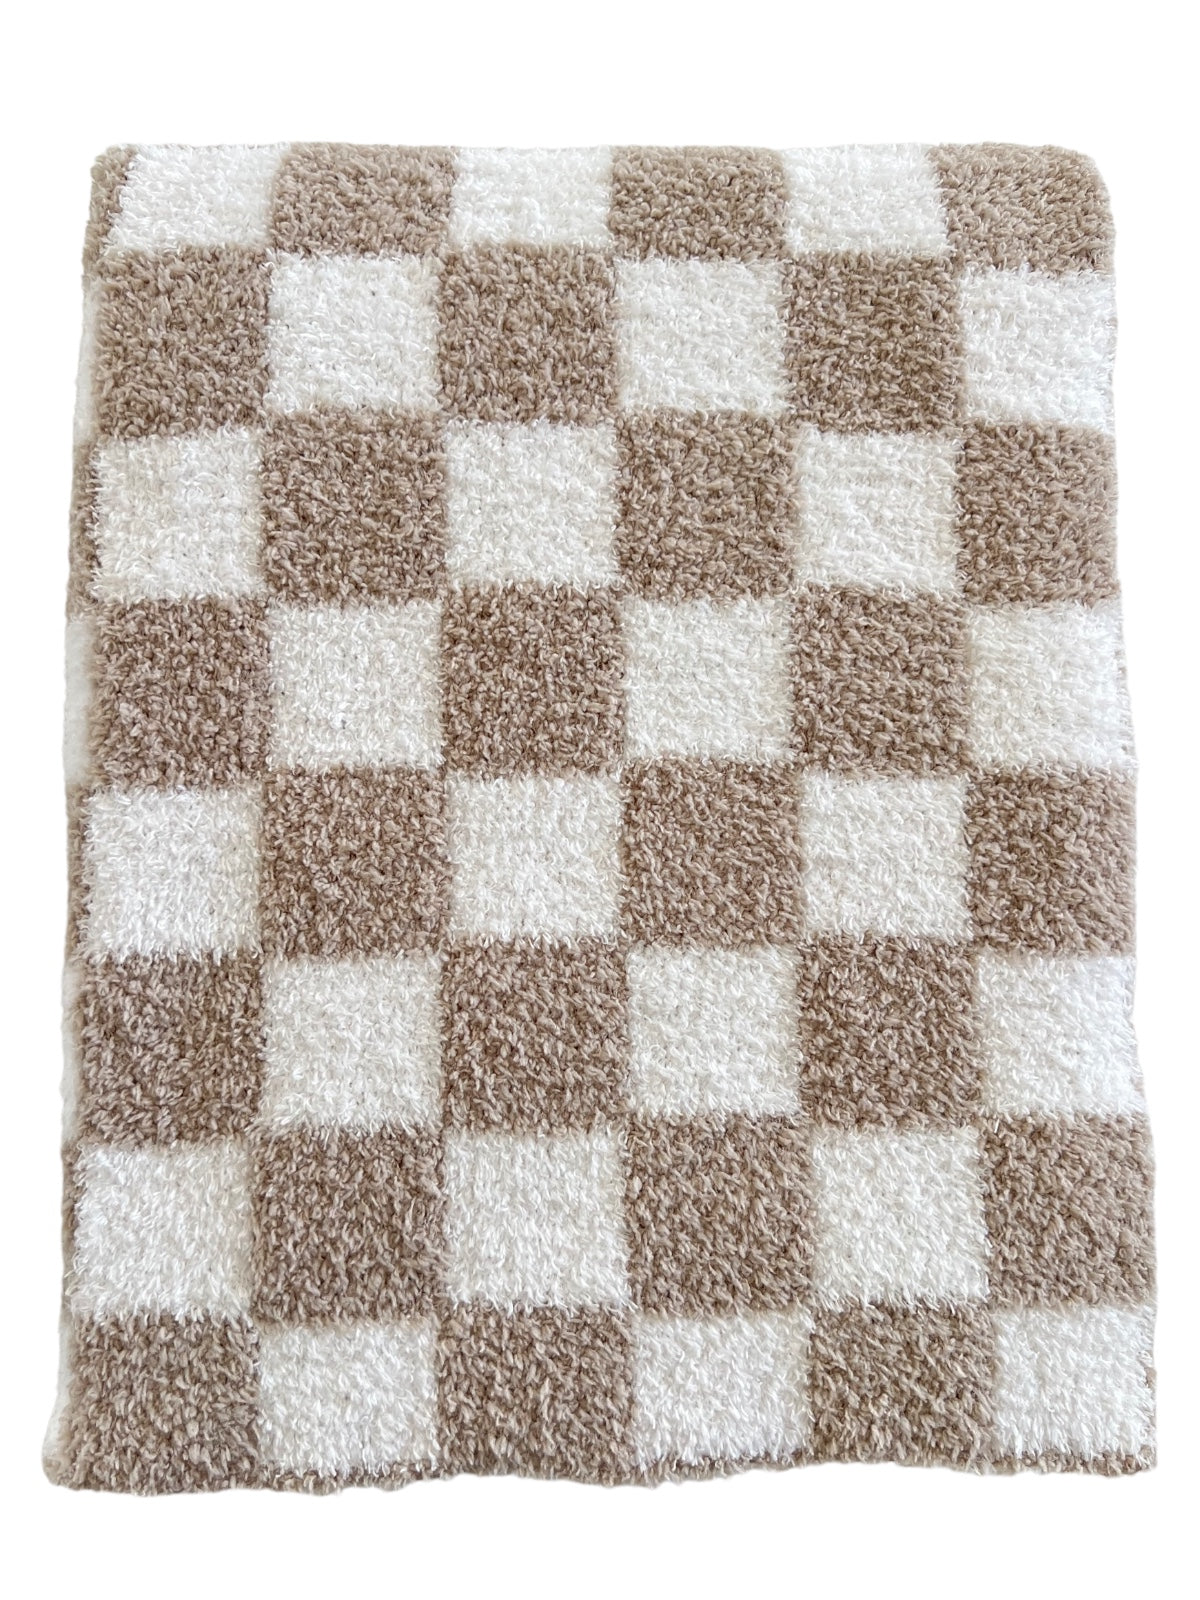 Phufy® Bliss Checkerboard Blanket, Cocoa